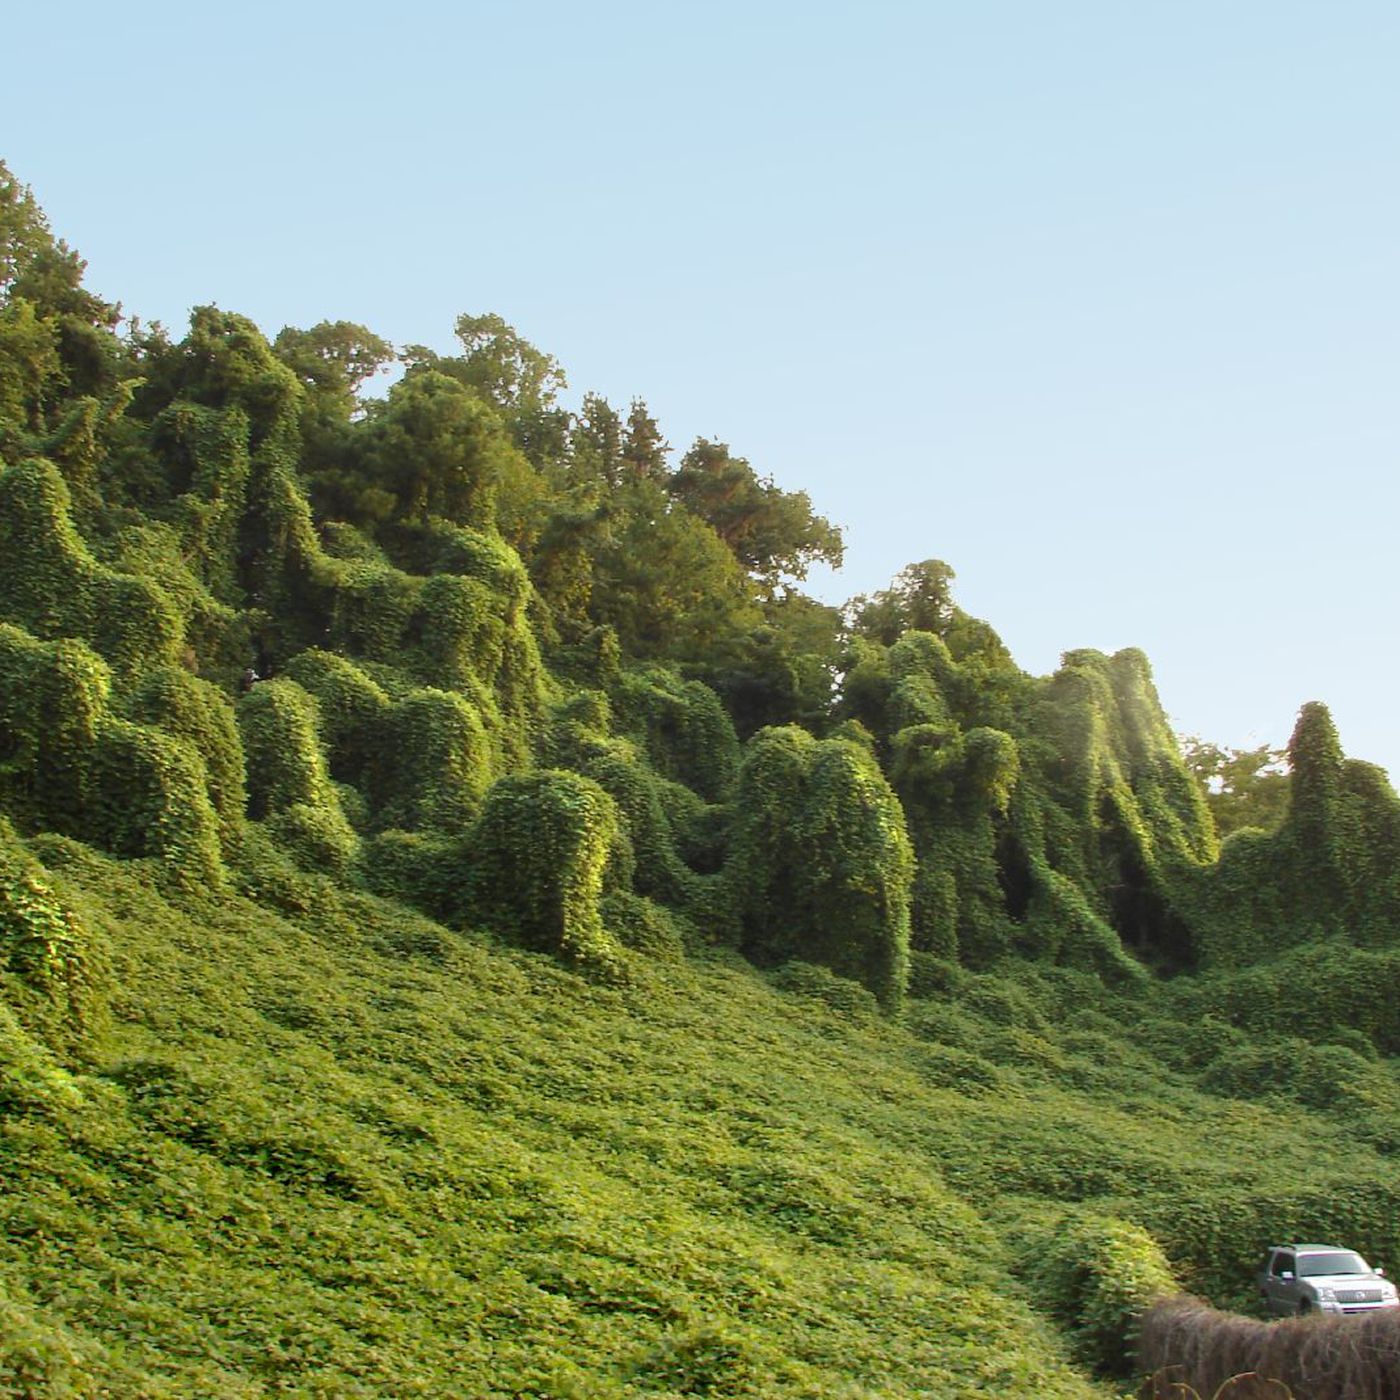 Kudzu hasn't actually taken over millions of acres. These other ...